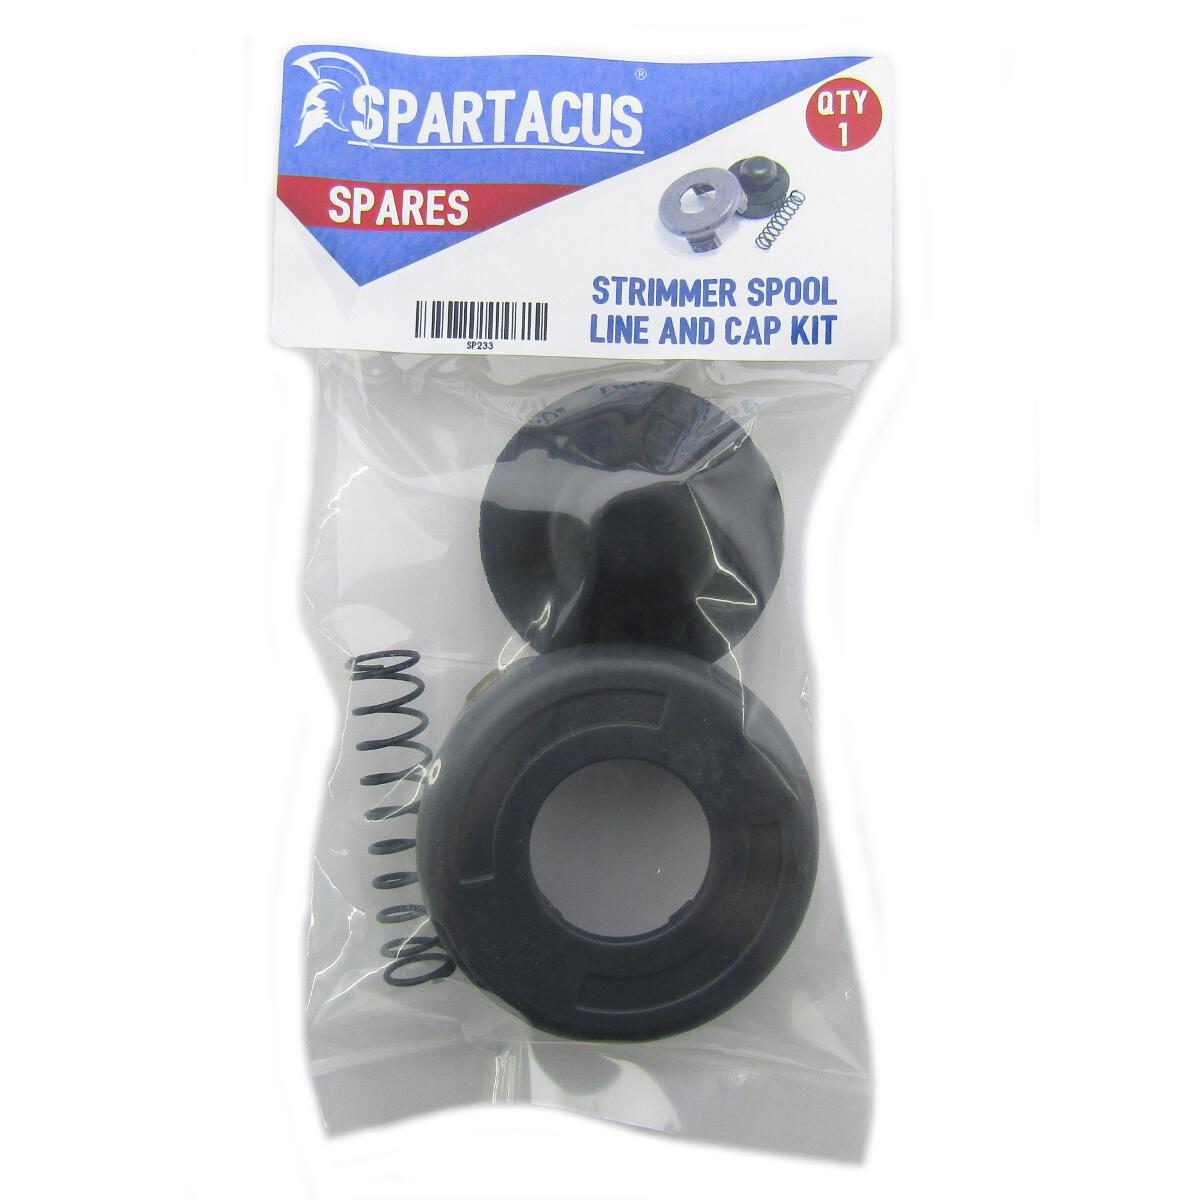 Spool Cover & Spring Fits Various Models Challenge Xtreme Spartacus SP233 Strimmer Spool & Line 